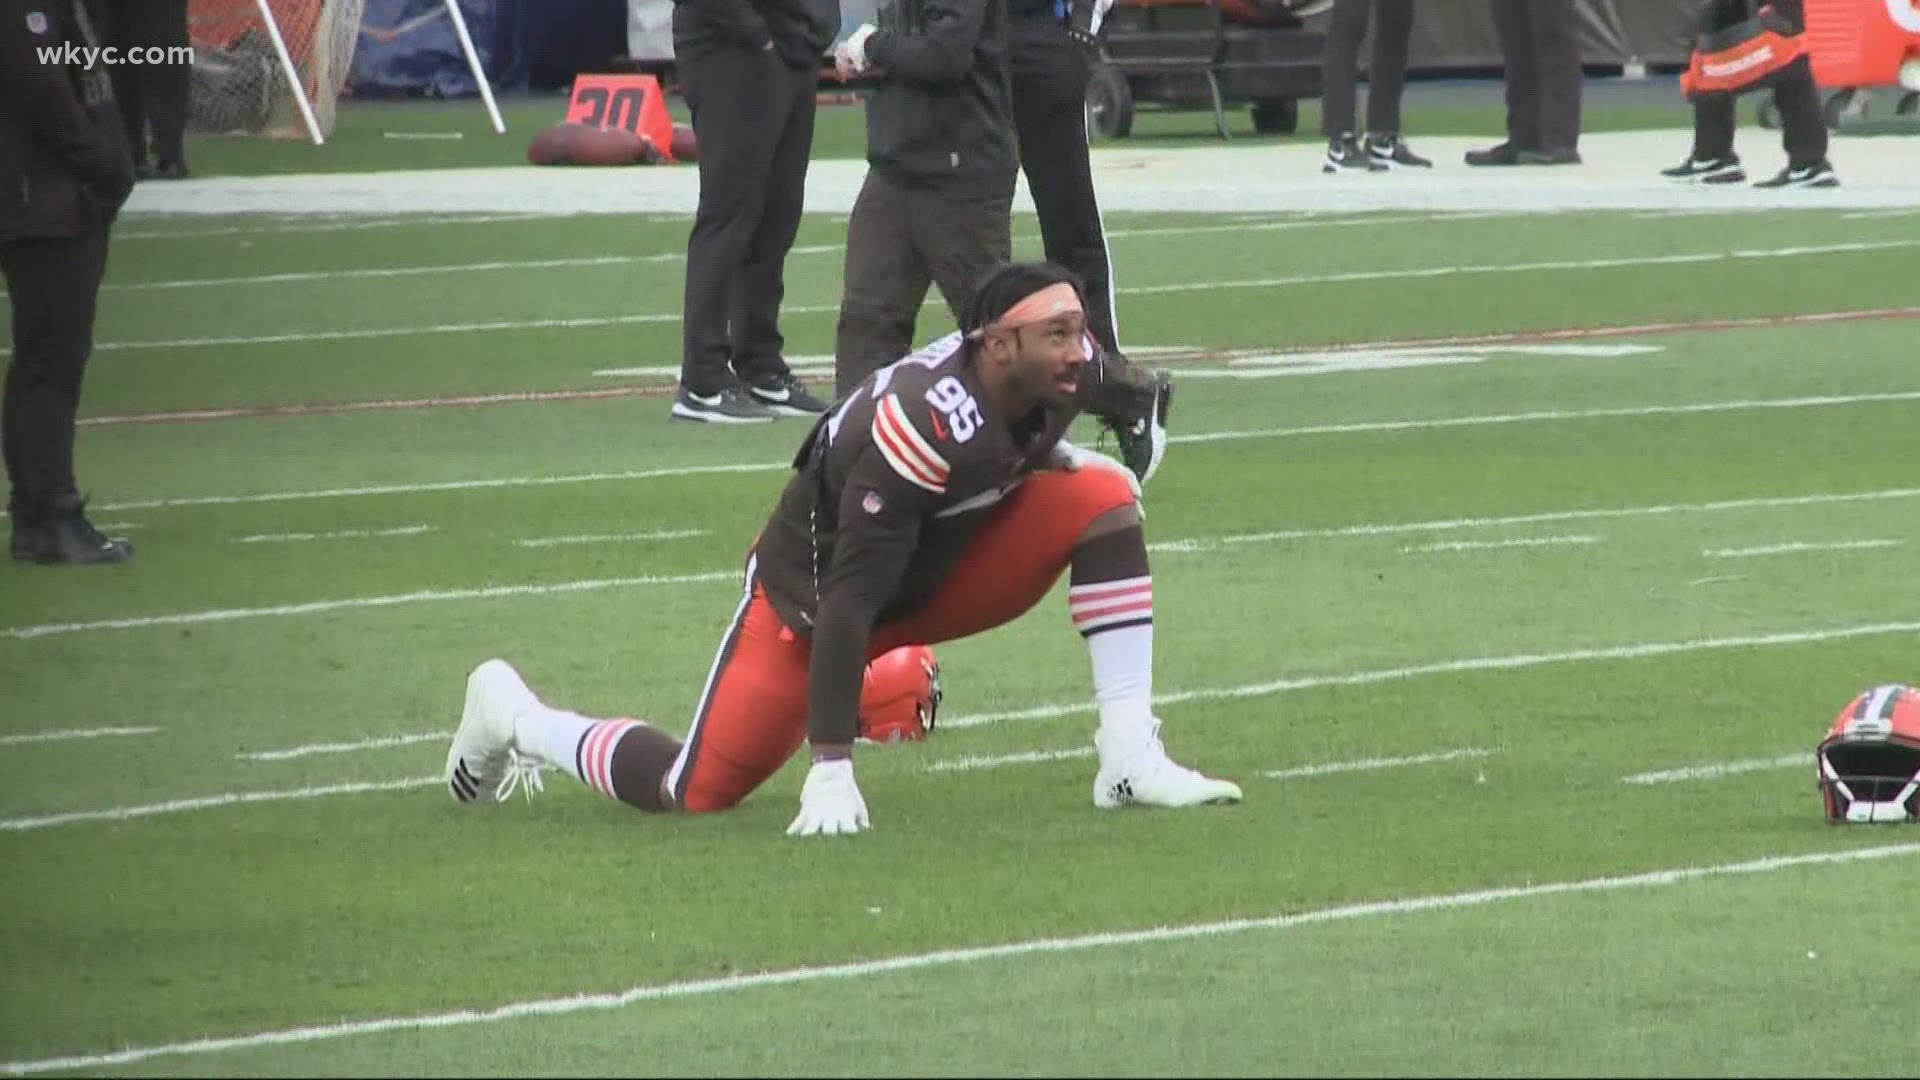 No victory Monday for the Browns but there is some good news to report. Myles Garrett escaped a major knee injury and expected to play against the Texans.